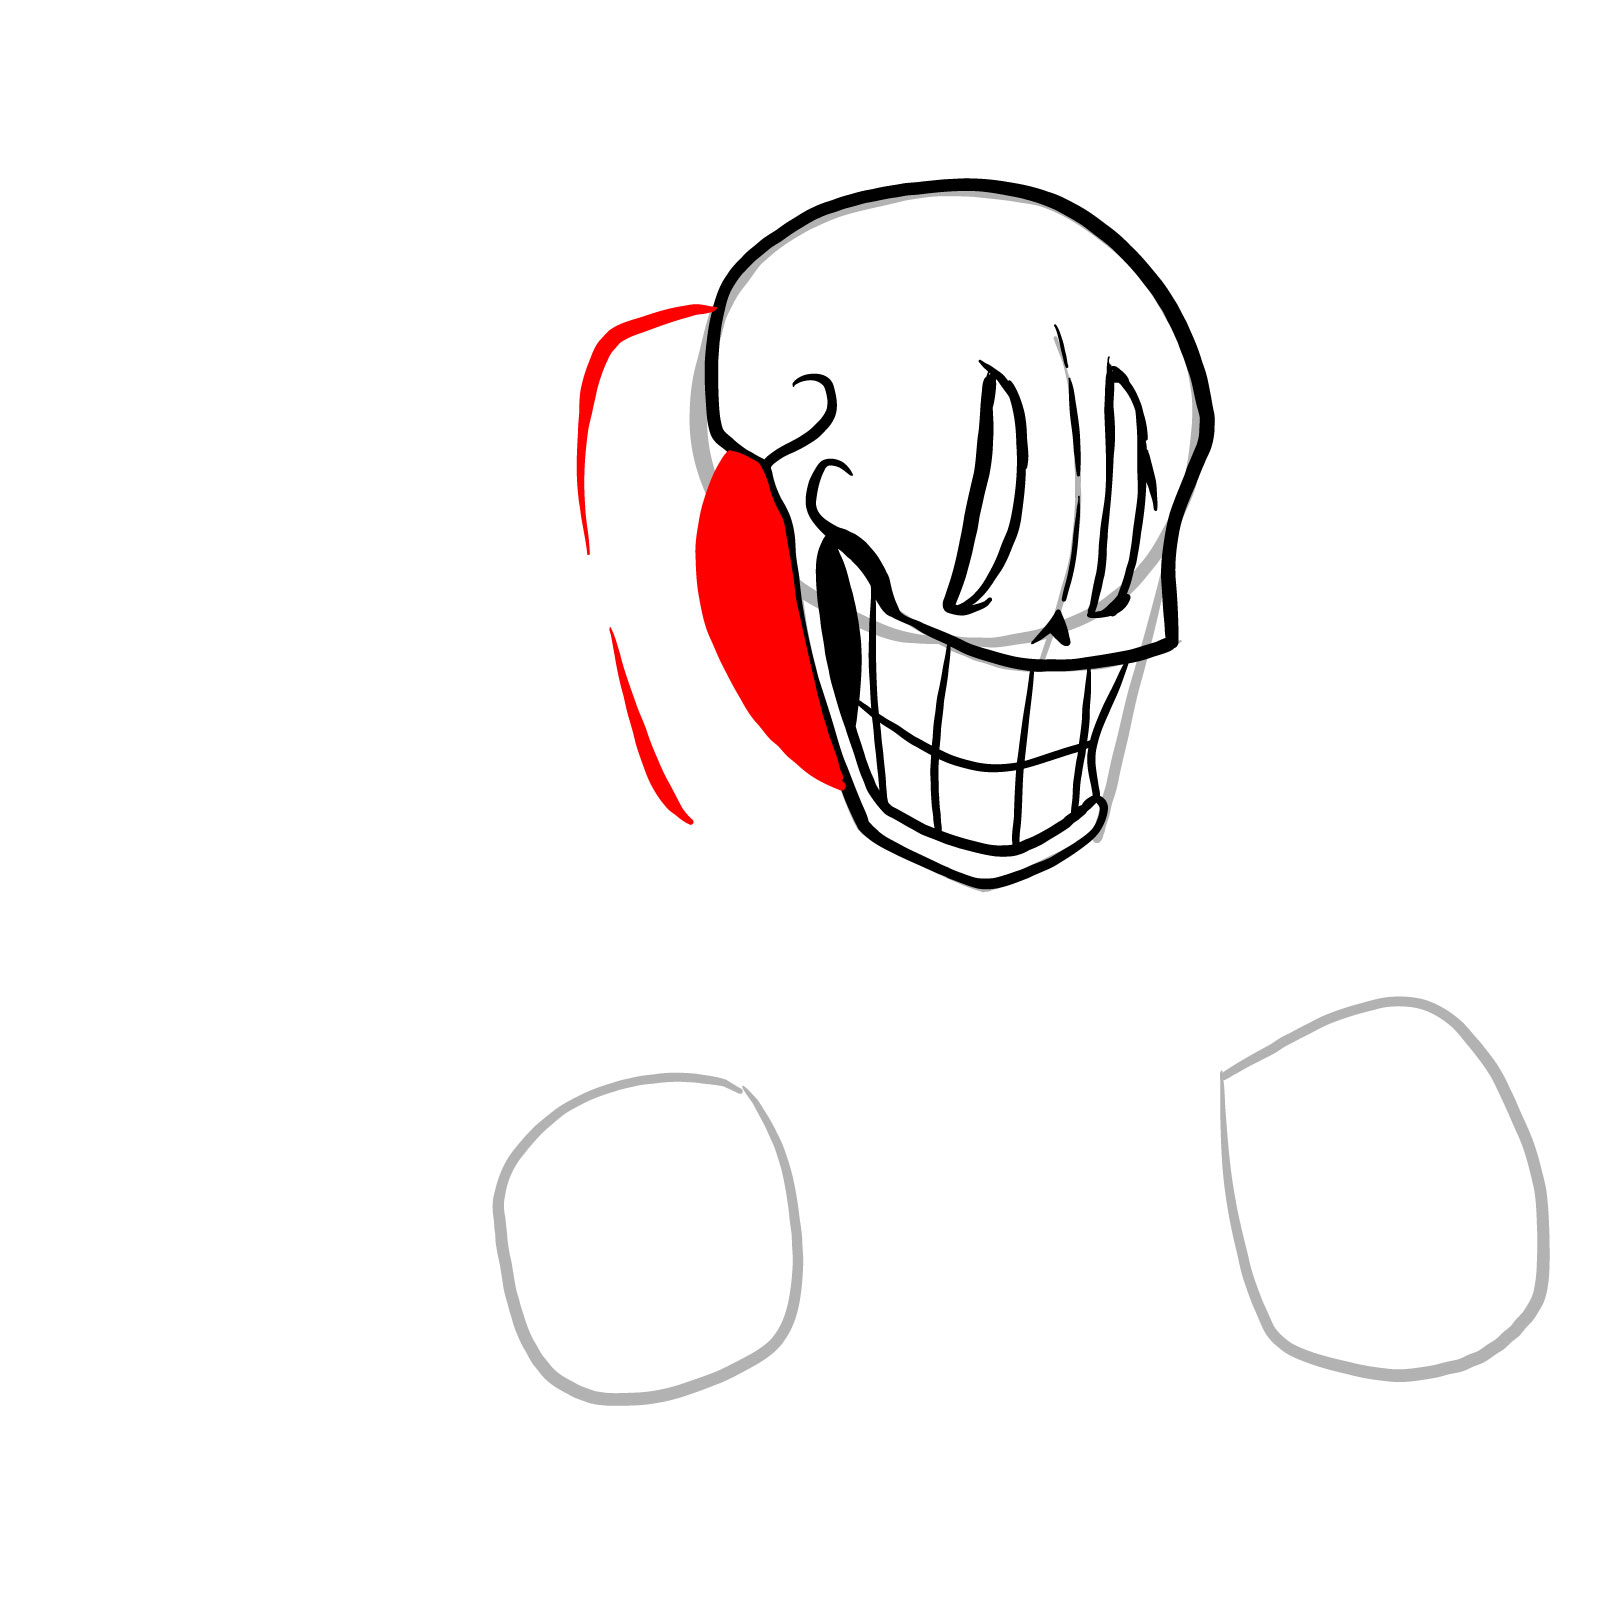 How to draw Phantom!Papyrus from FNF - step 12